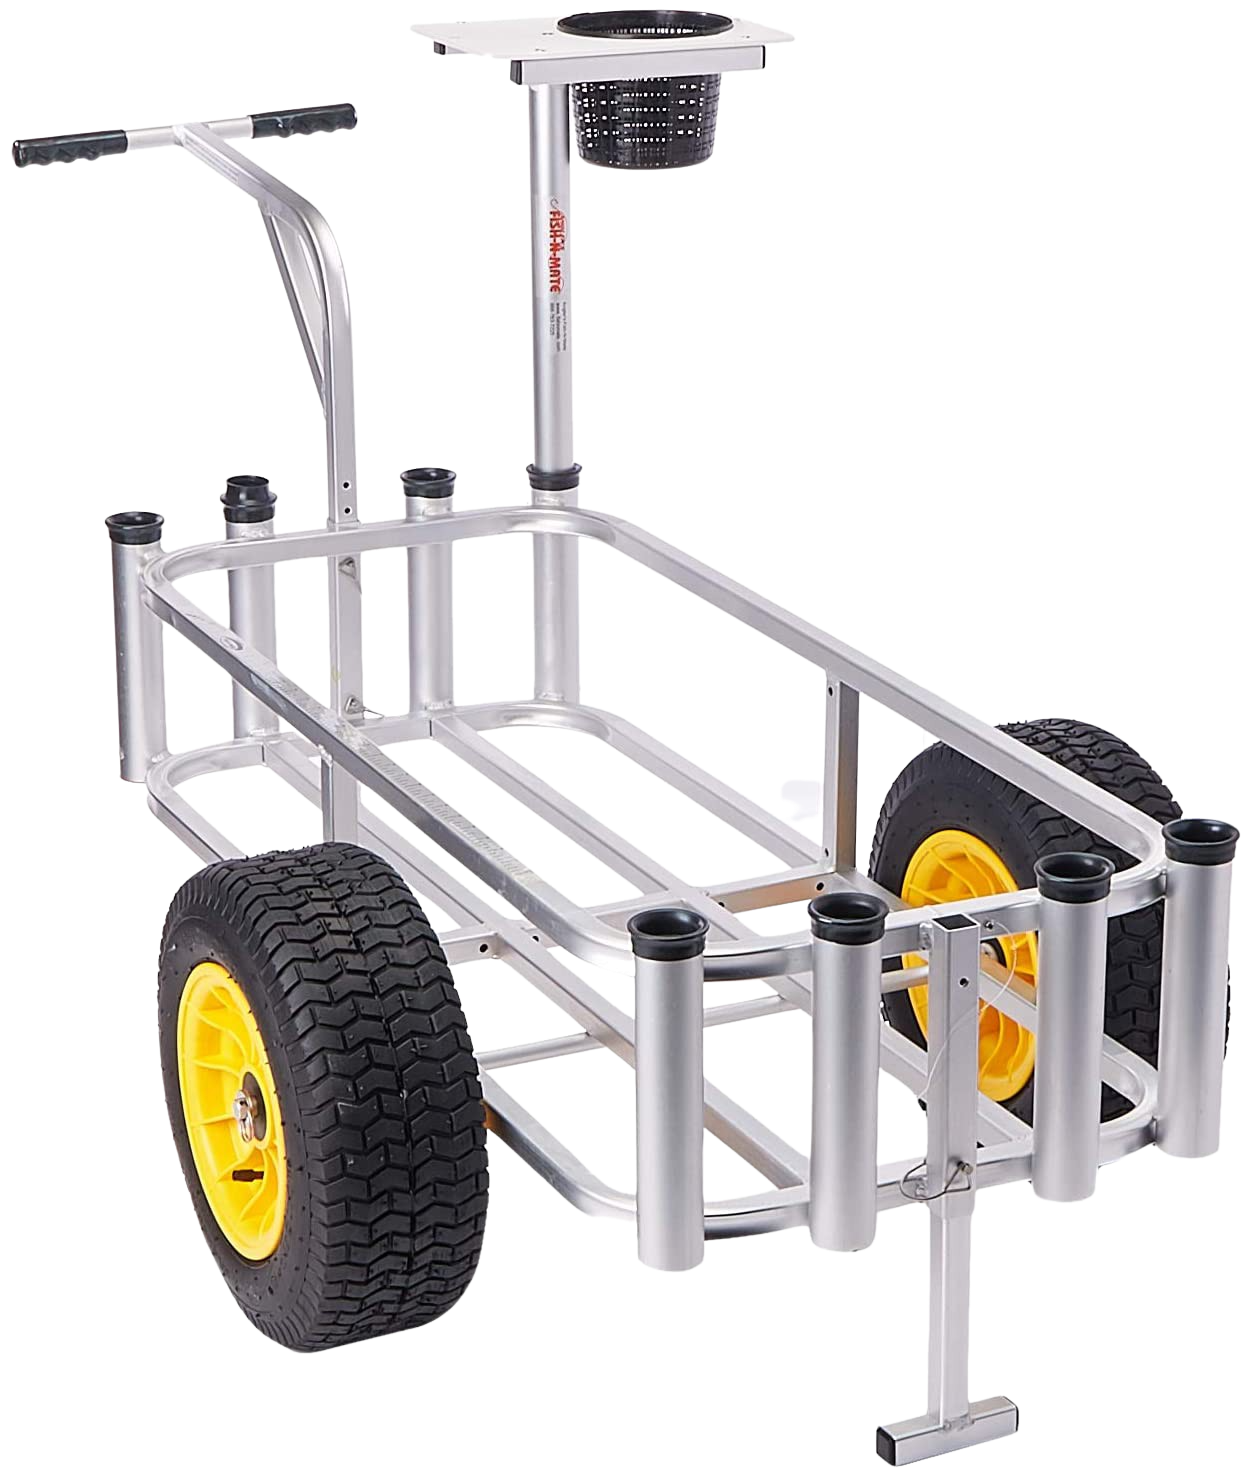 Angler's Fish-N-Mate 143 Pier Cart with Cutting Board and Bait Basket New